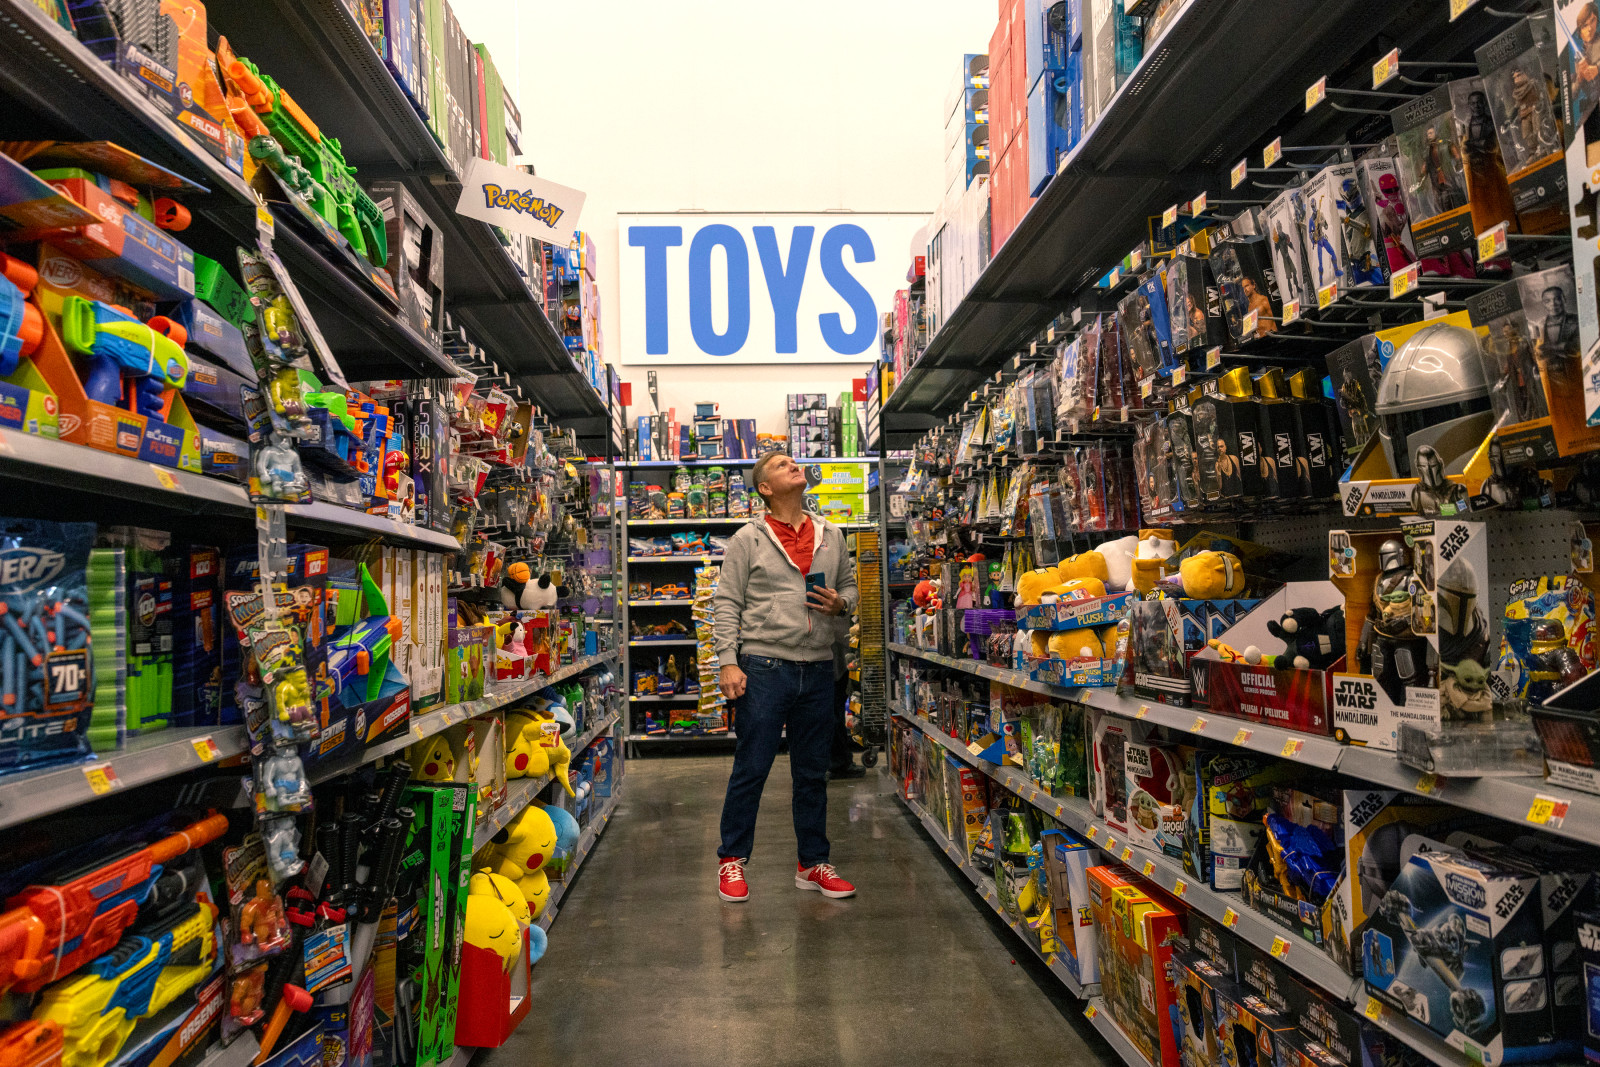 A person wearing a gray zippered hoodie looks up at shelves of toys under a sign that says "TOYS"